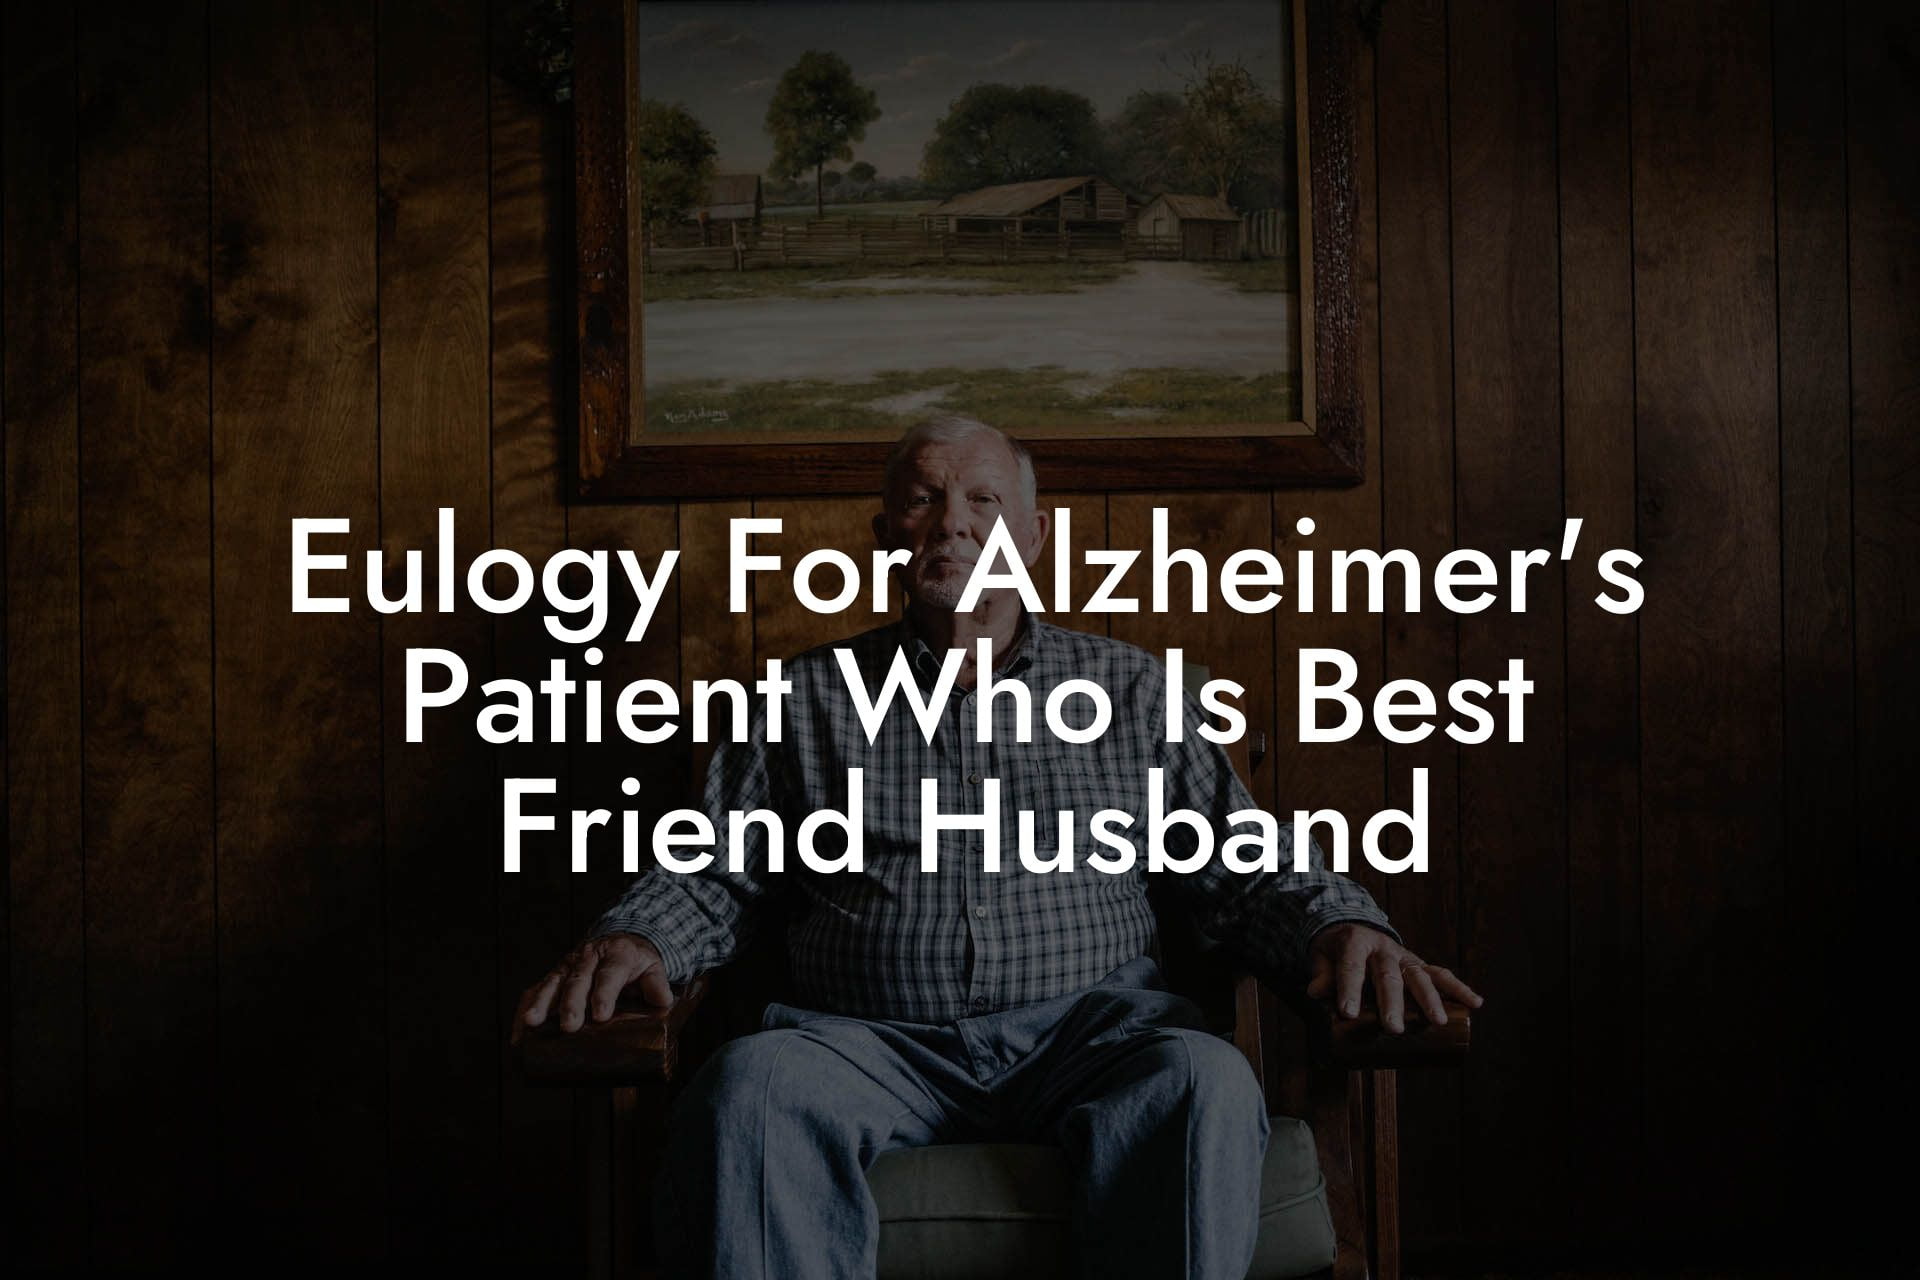 Eulogy For Alzheimer's Patient Who Is Best Friend Husband